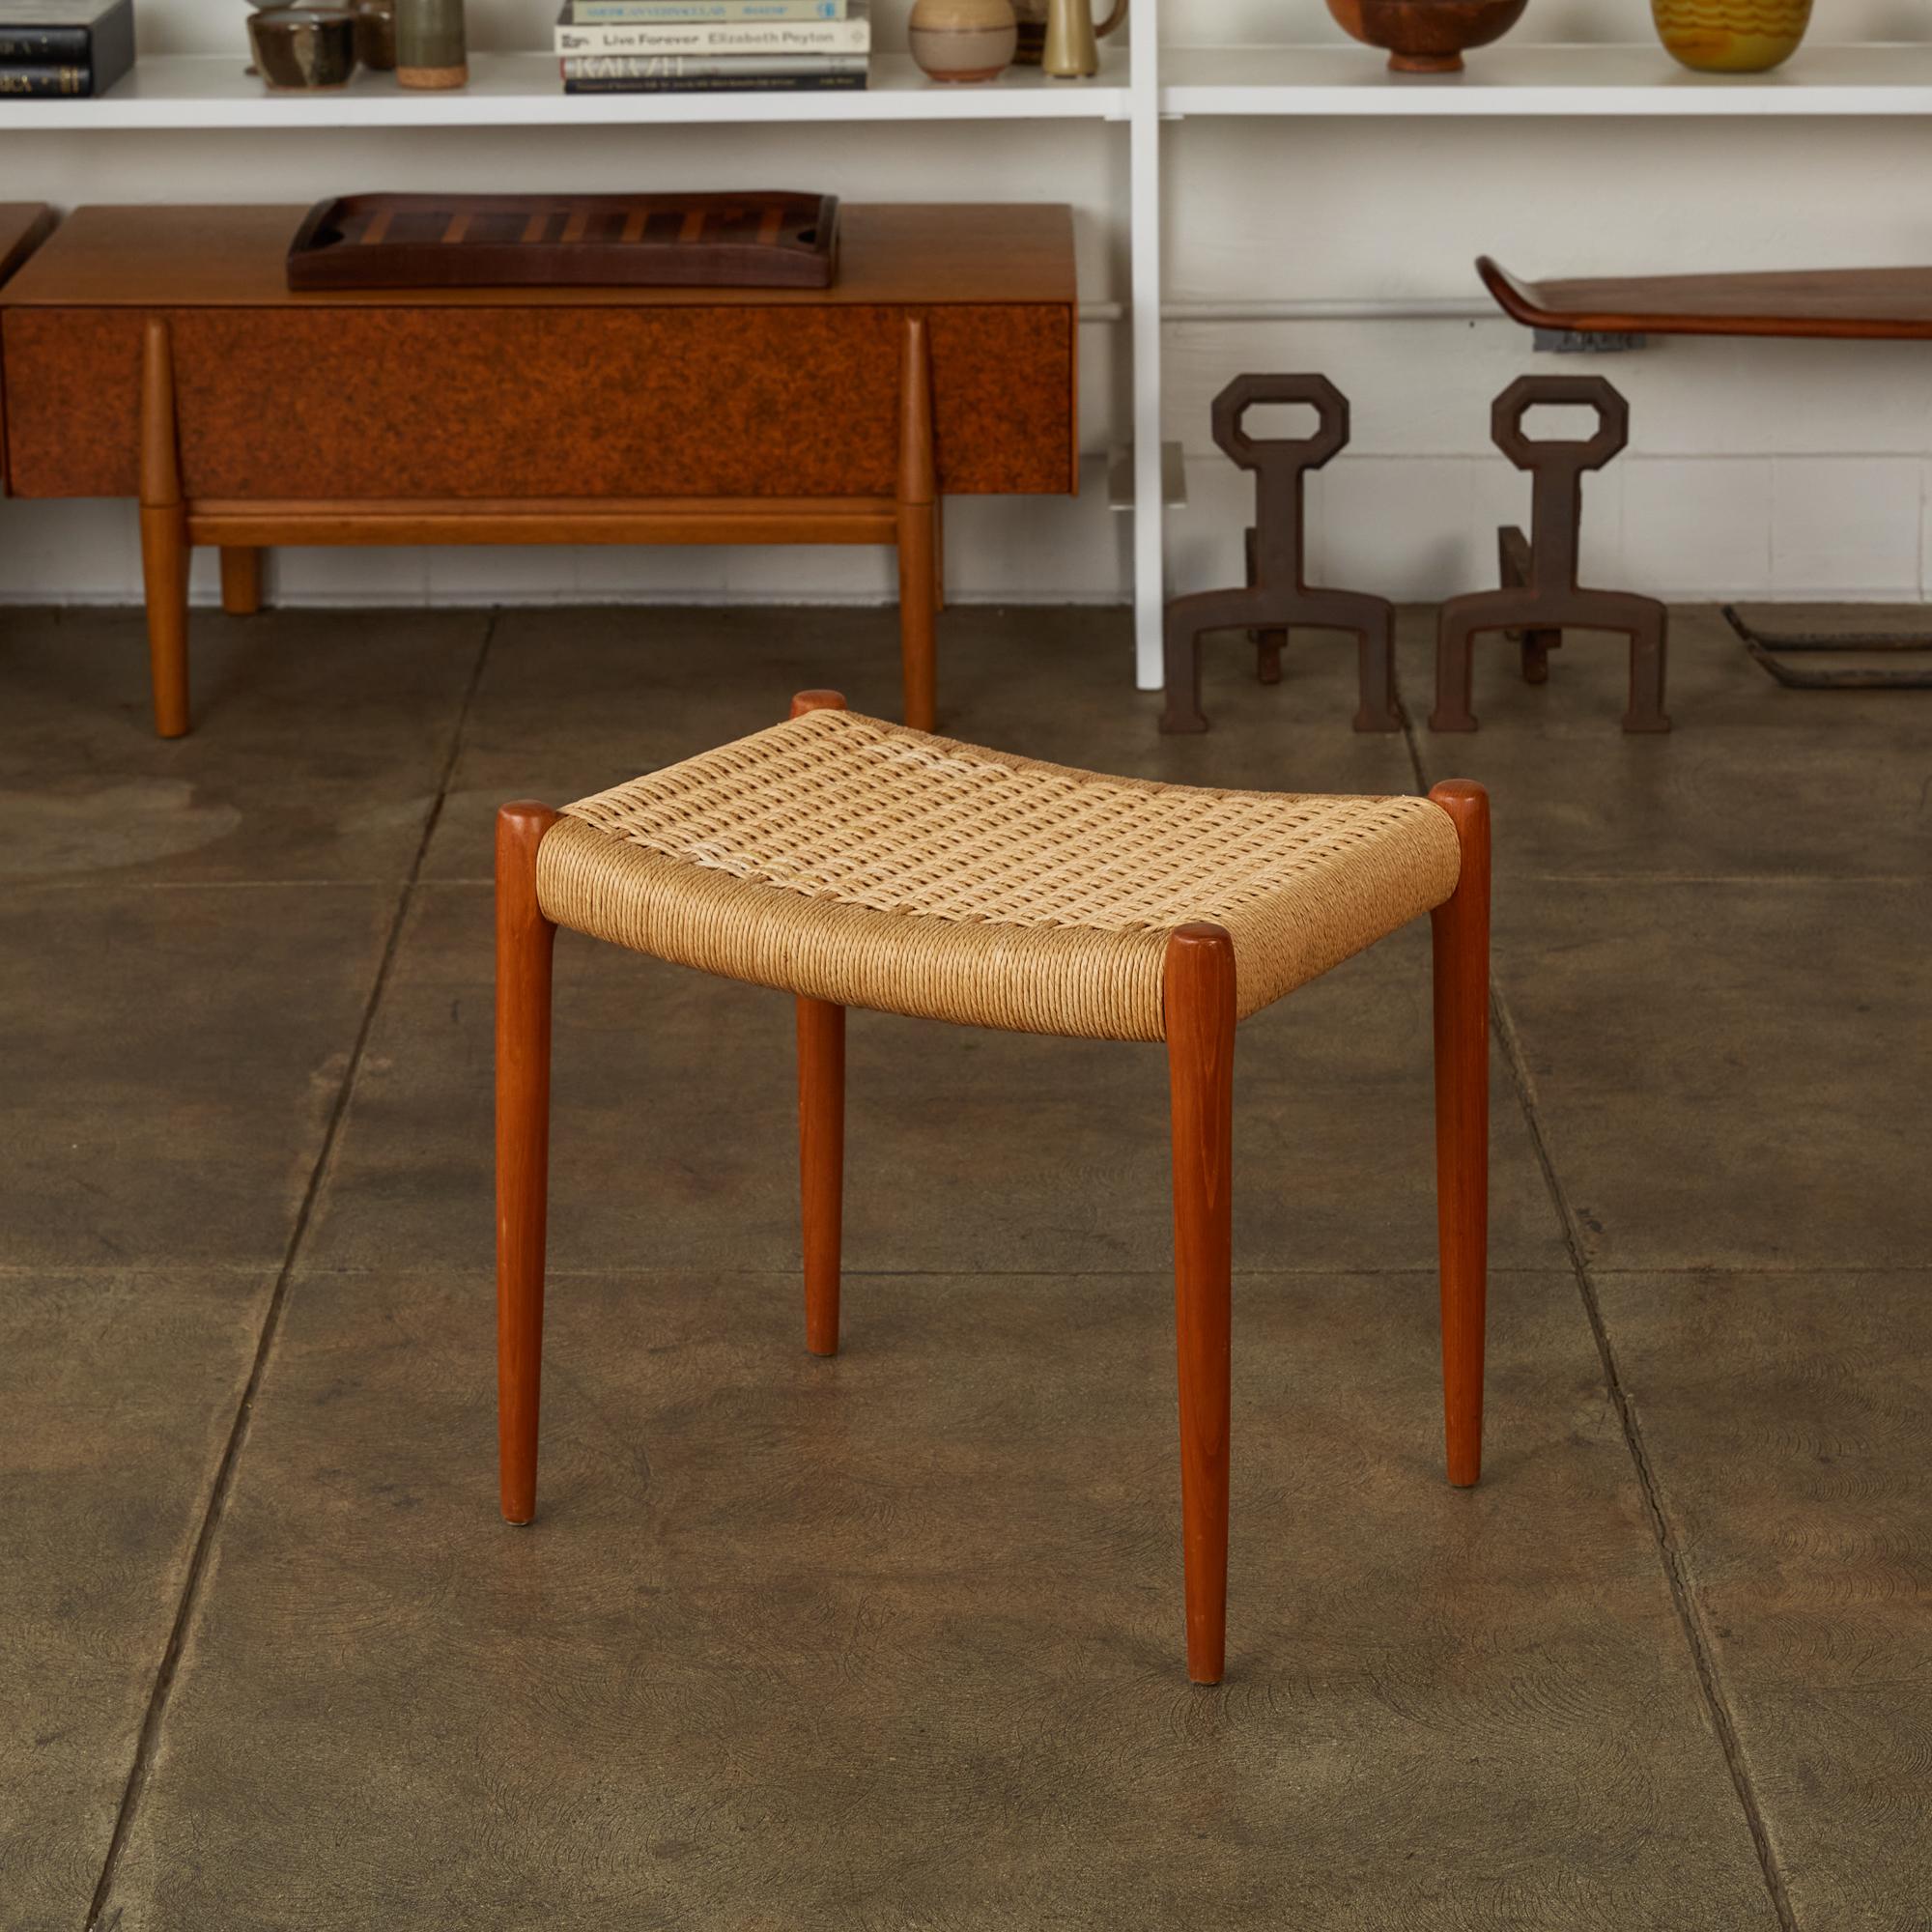 The model 80A ottoman, designed in 1963 by Niels Møller. A simple ottoman or footrest with Danish cord upholstery and slightly tapered legs, manufactured for Møller’s family company, JL Møllers Møbelfabrik of Denmark. The cord seat, made of twisted